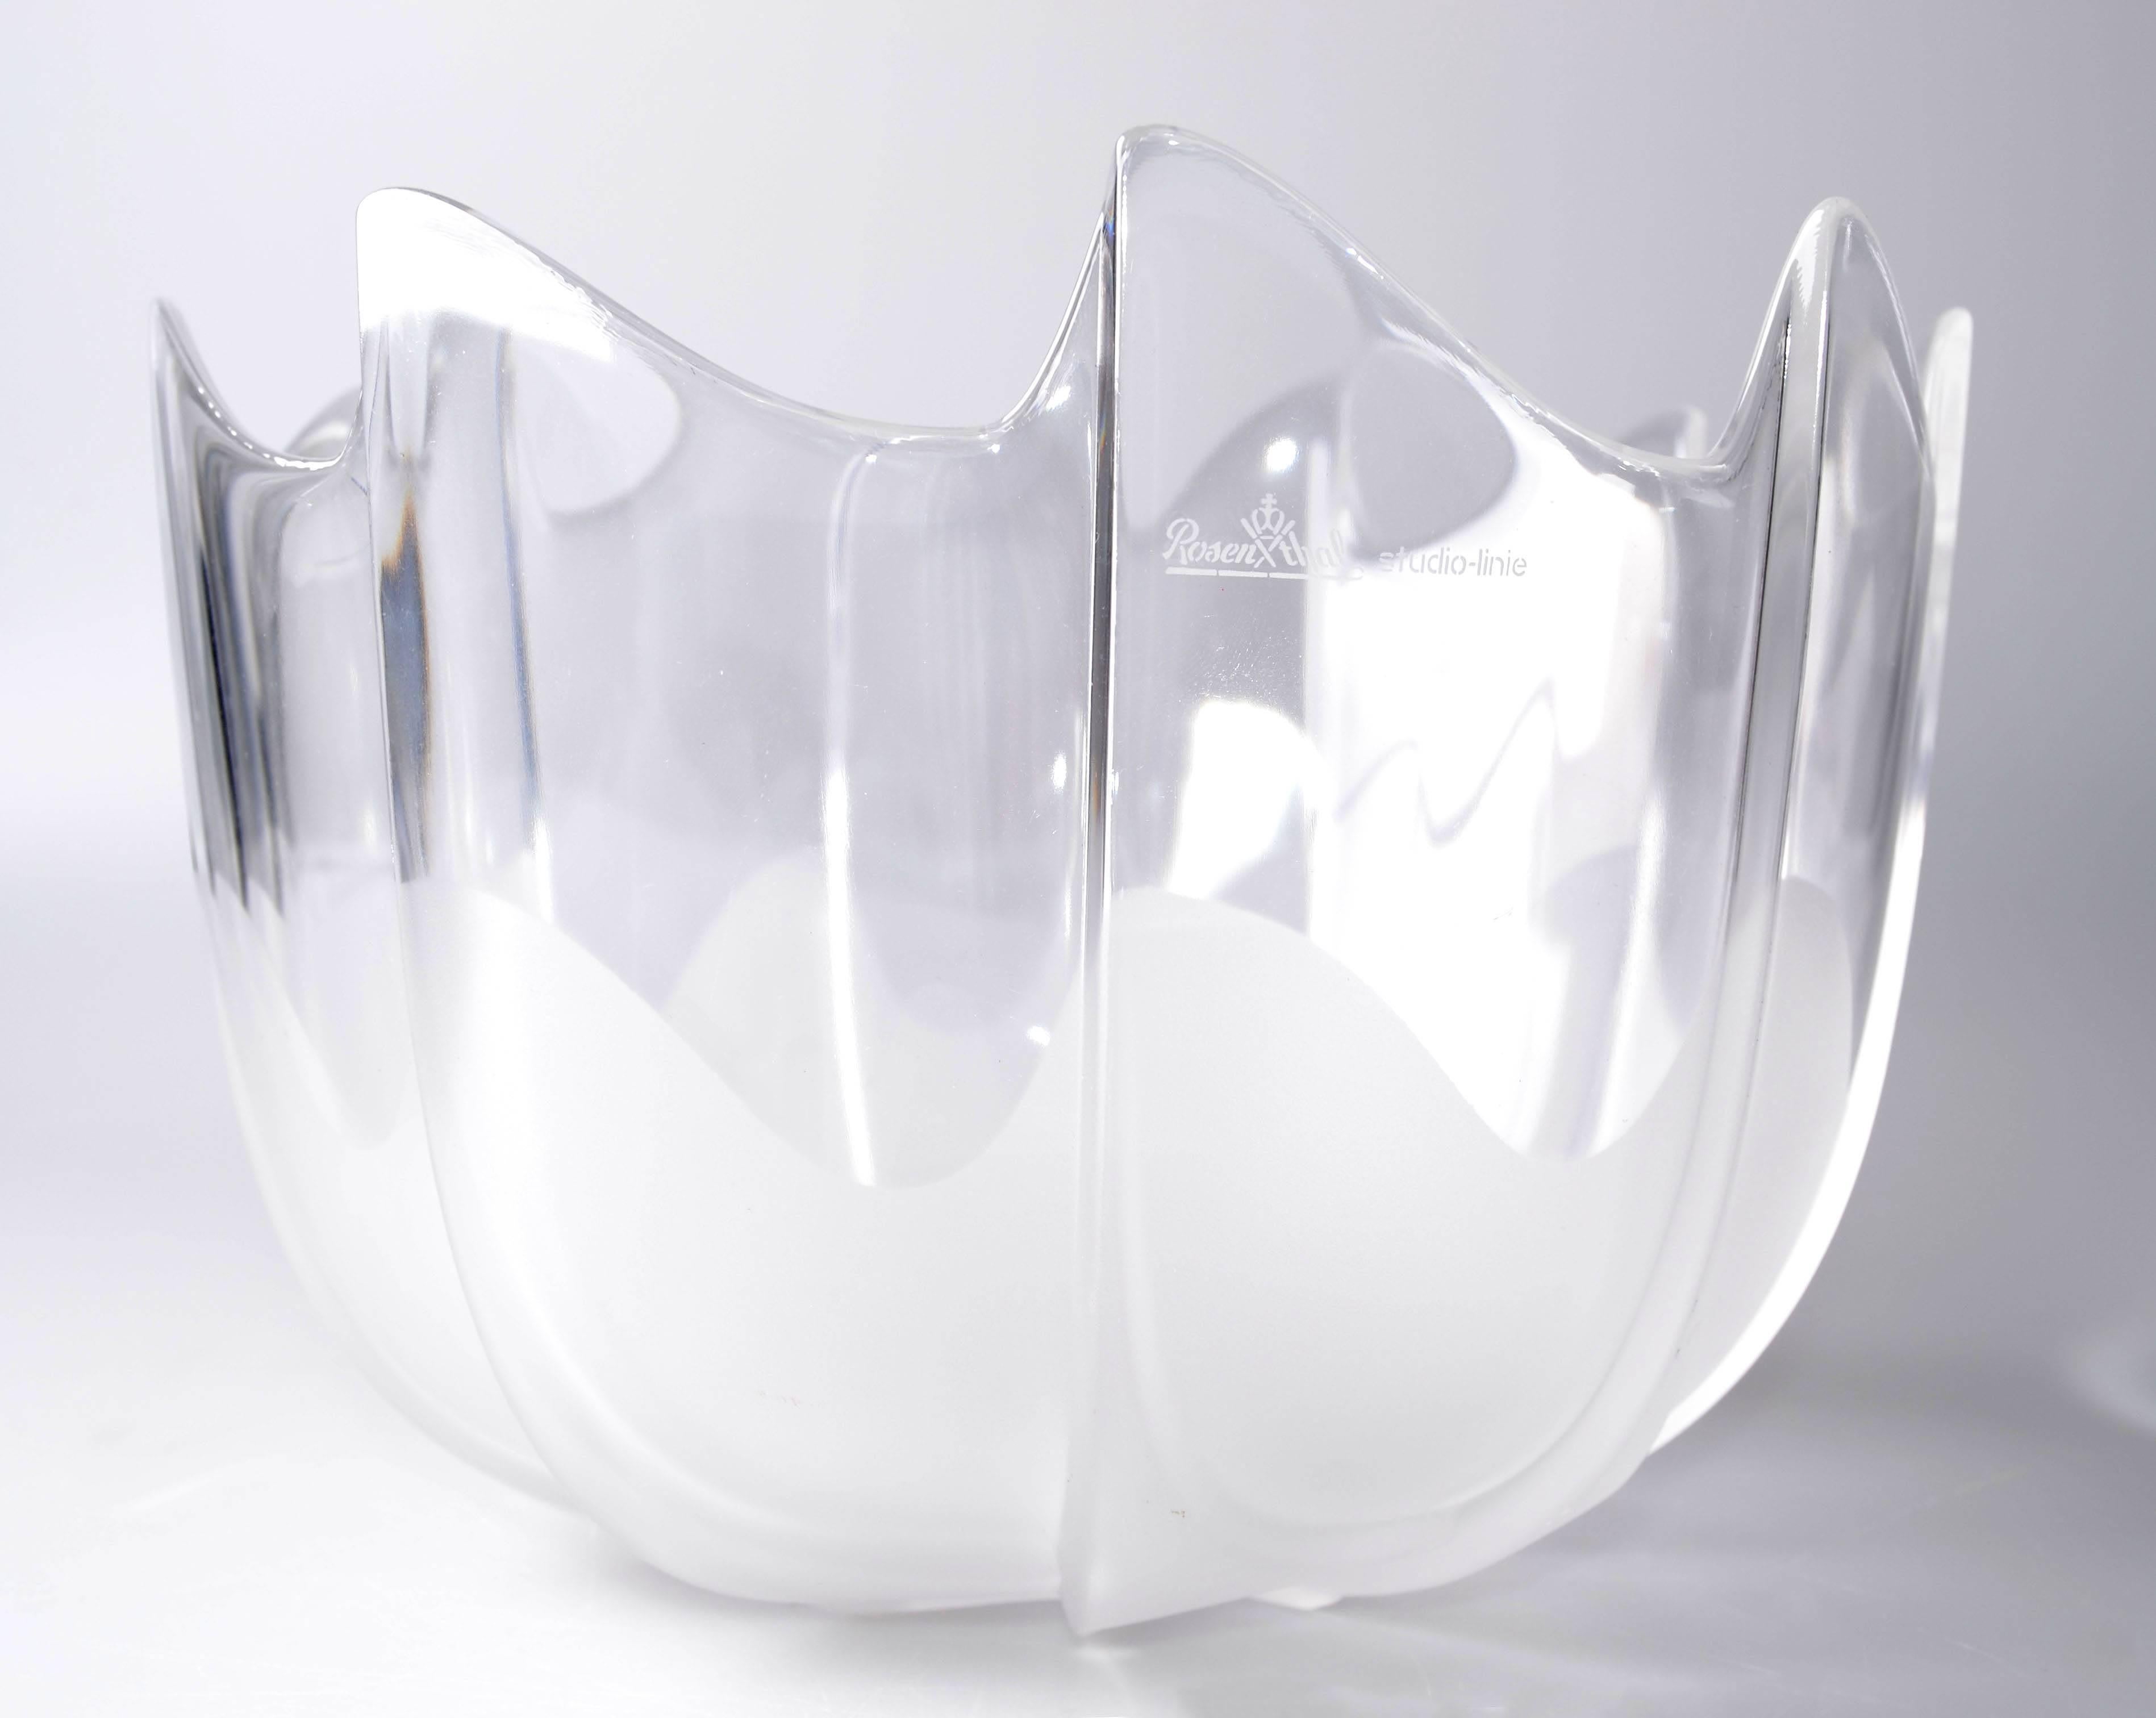 Striking original Rosenthal scalloped frosted crystal glass serving bowl by Studio-Linie.
Maker's mark on upper rim, Rosenthal Studio-Linie.
A serving bowl that is always in the center of attention with German craftsmanship.